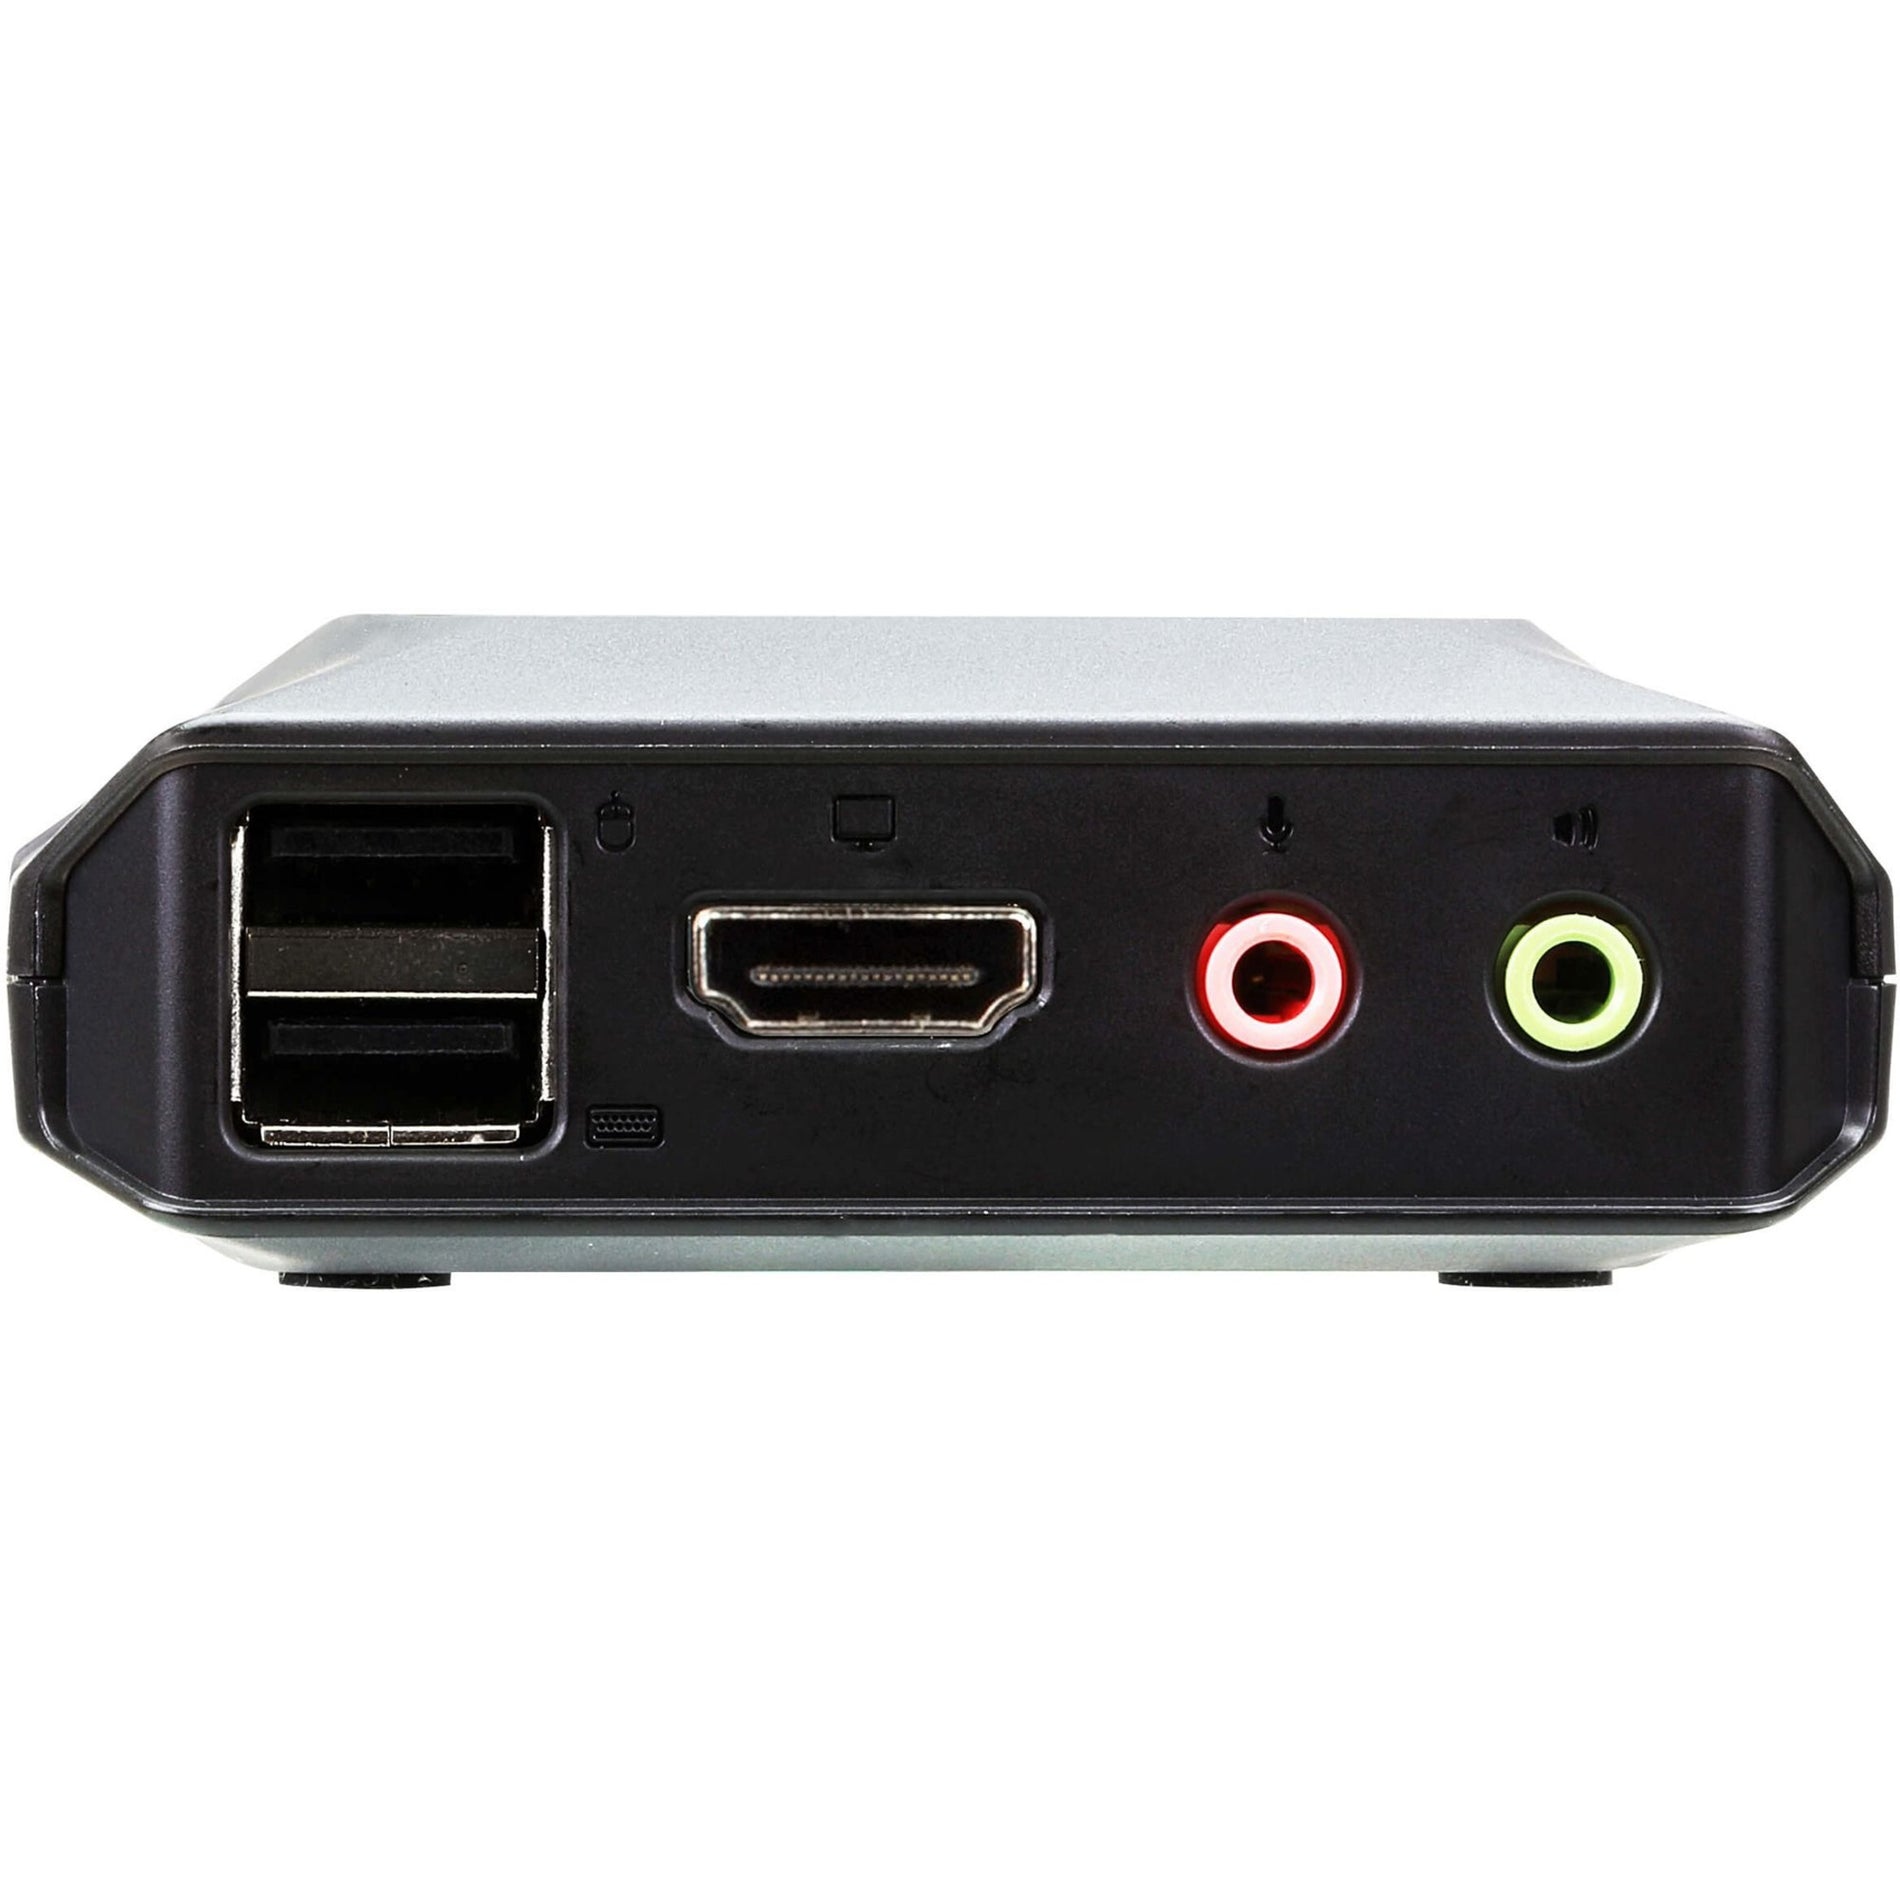 ATEN CS22H 2-Port USB 4K HDMI Cable KVM Switch with Remote Port Selector, Easy Remote Control and Ultra HD Video Support